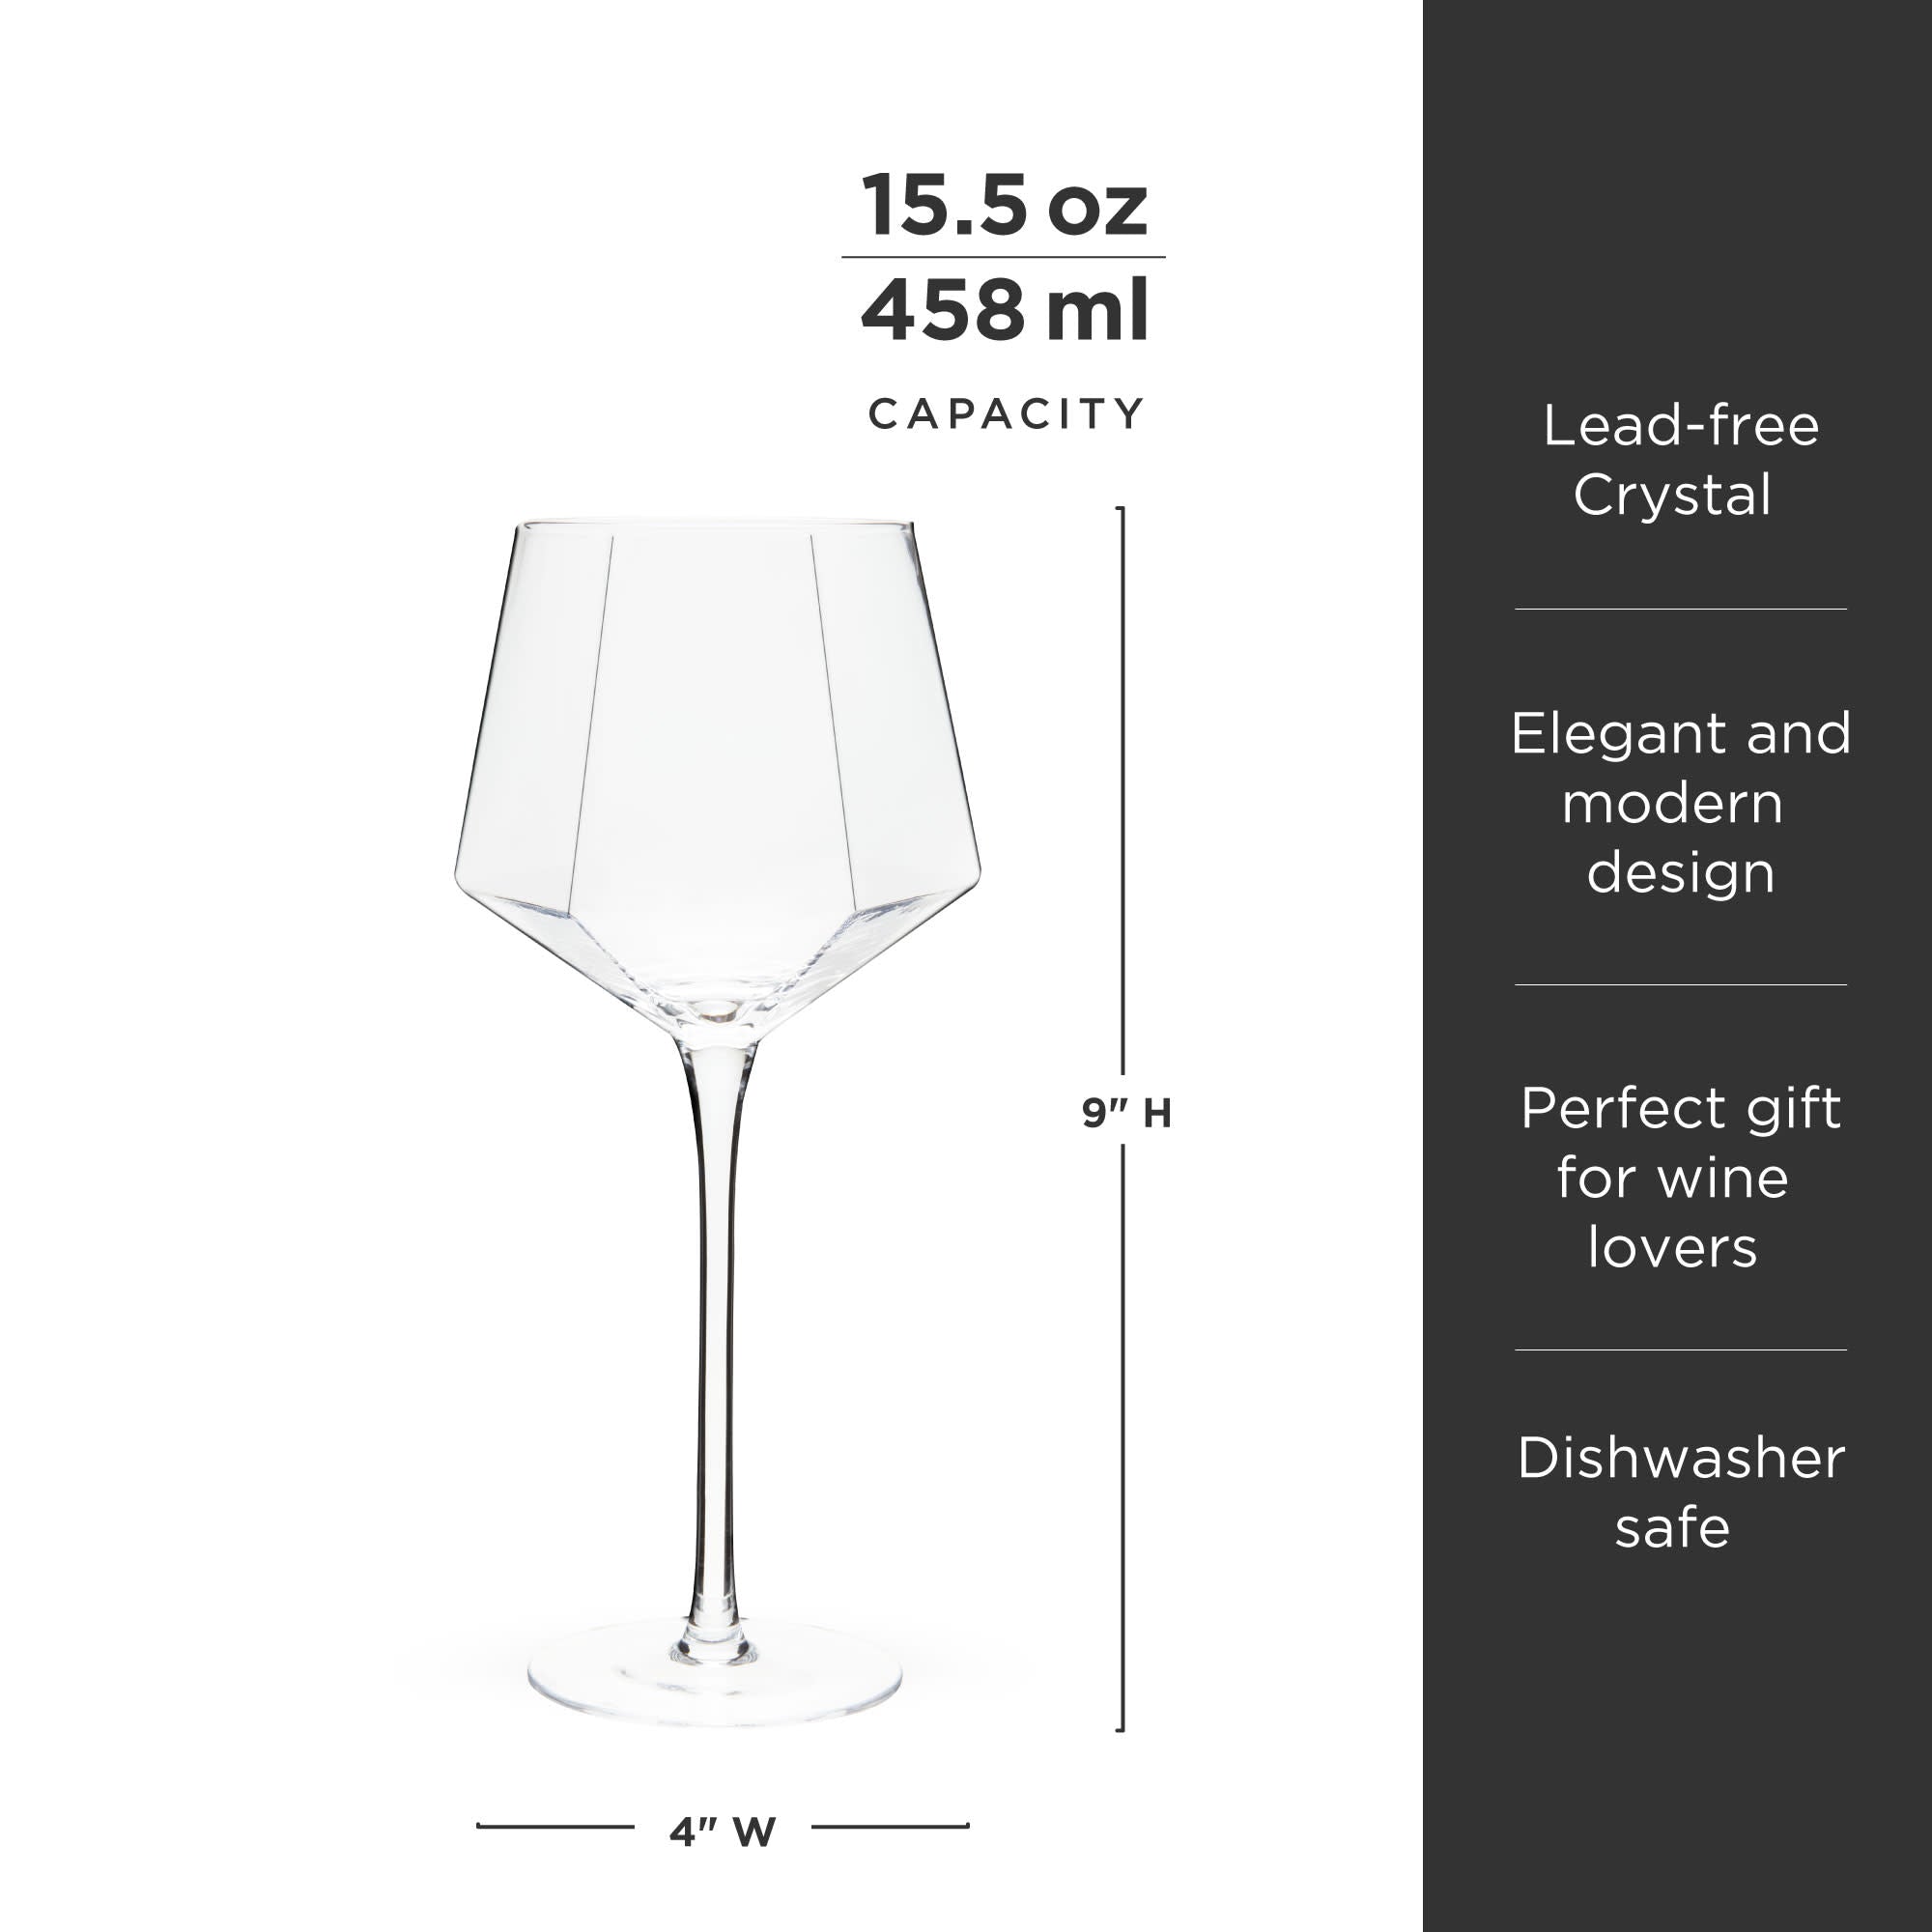 Large Stemless Wine Glass – Cyclone Design – Variety of Colors